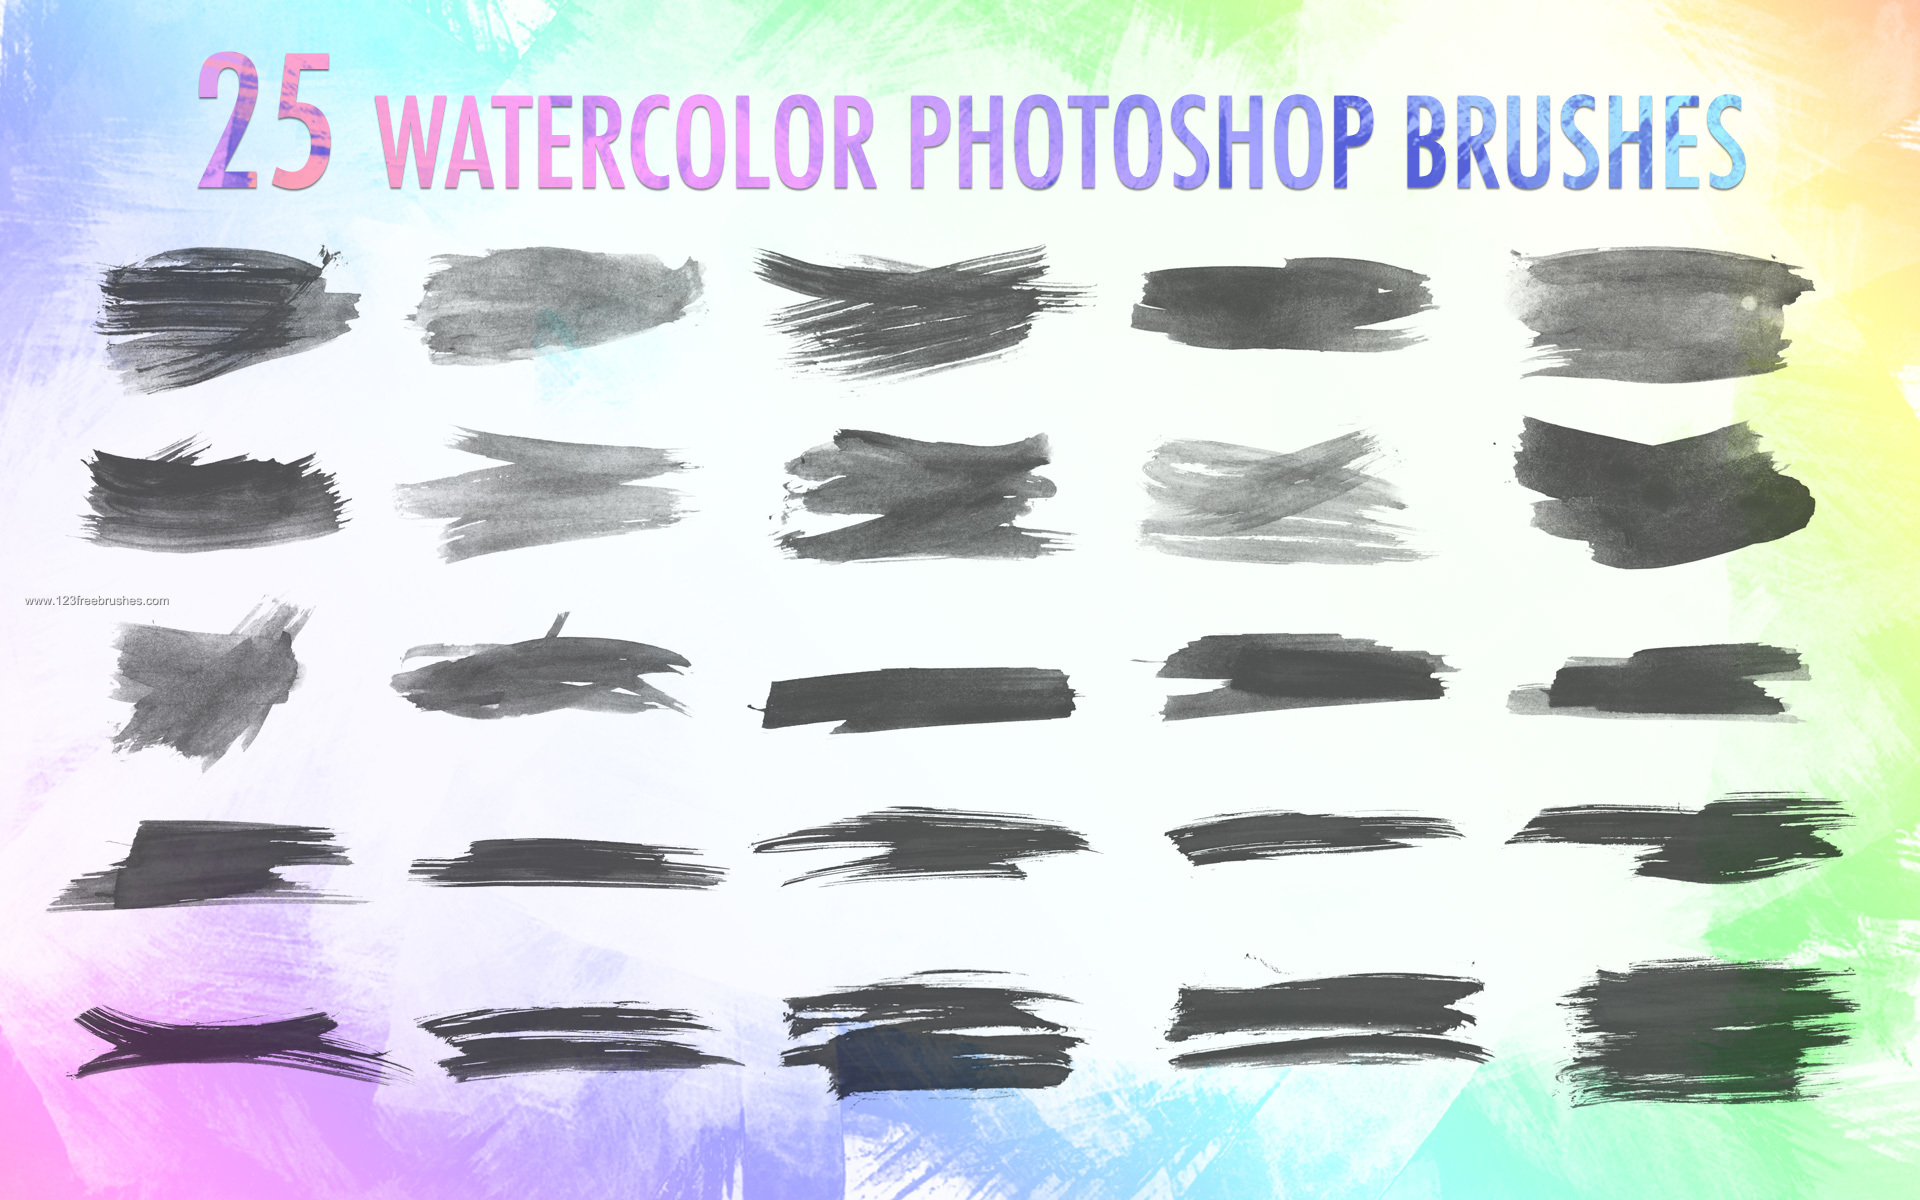 photoshop watercolor brushes free download